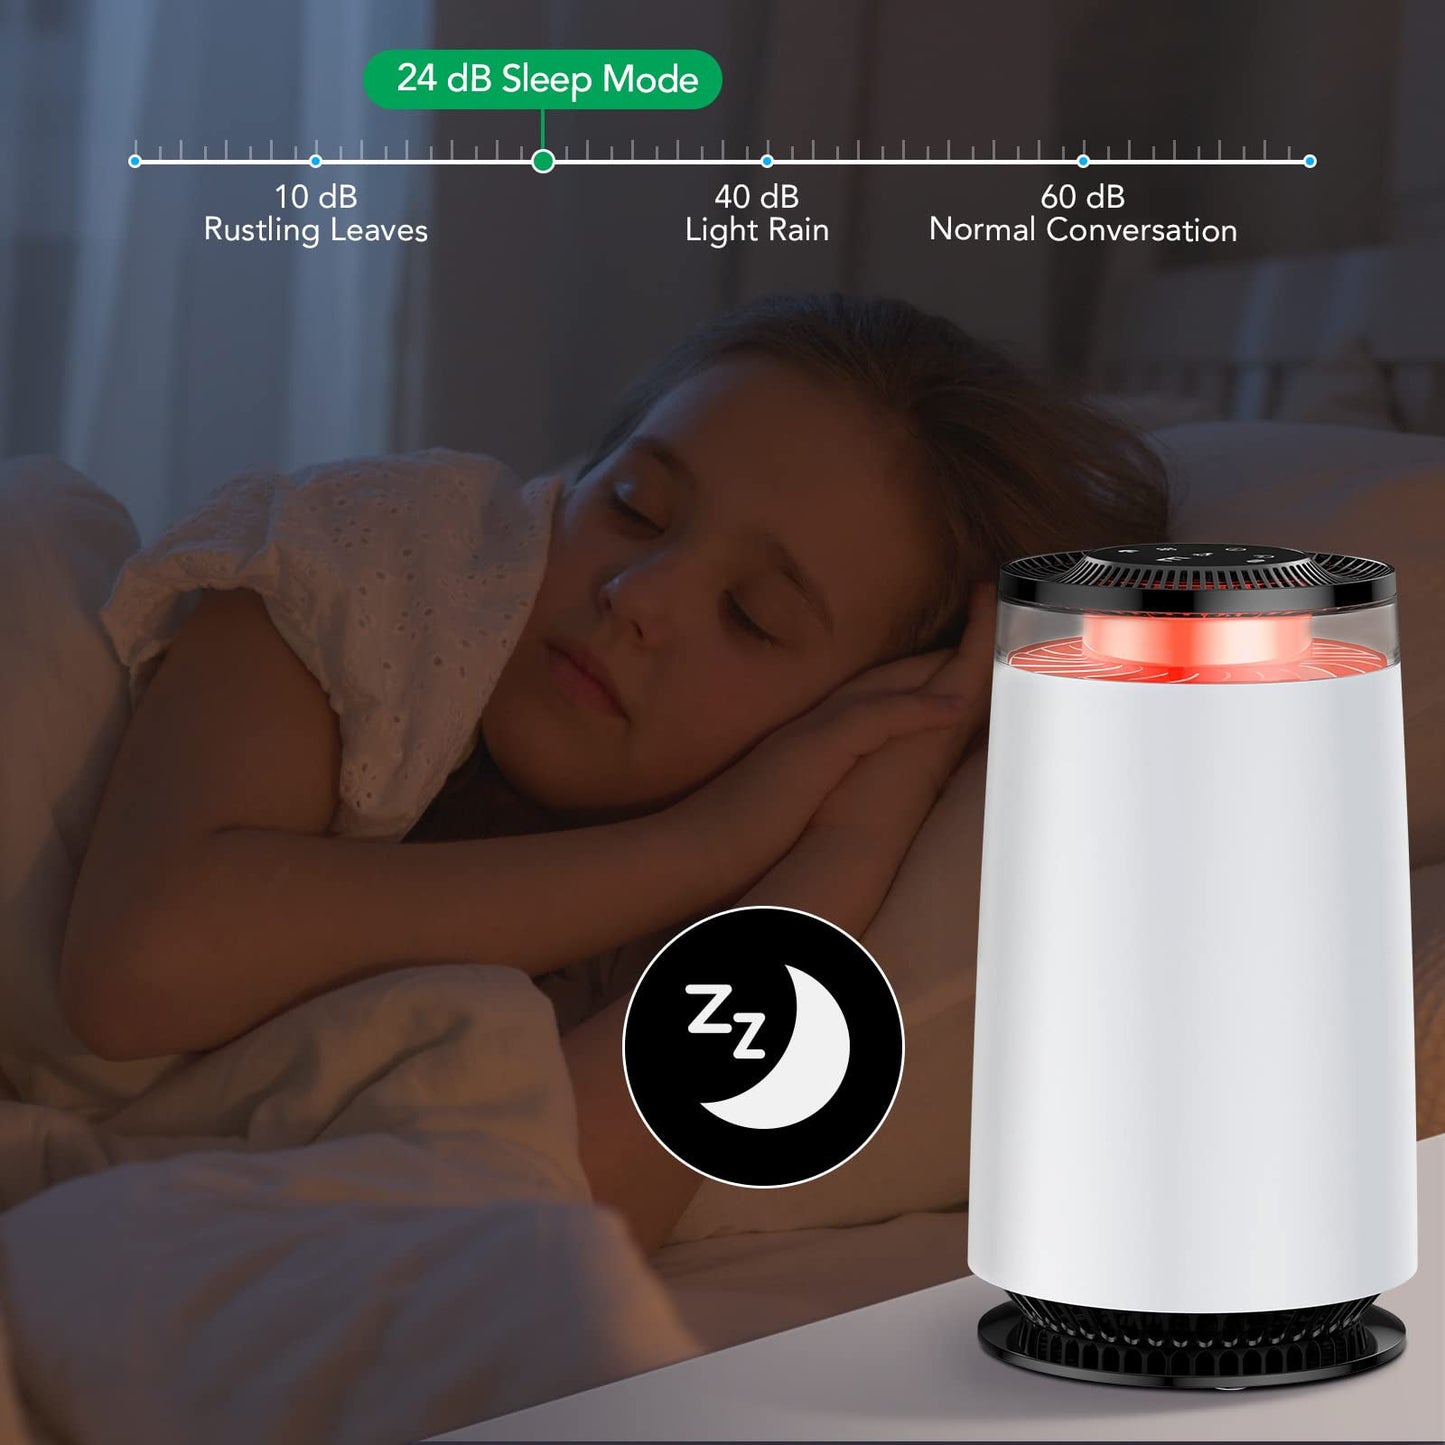 GARVEE Air Purifier AD4 with Night Light for Home Large Room US Plug